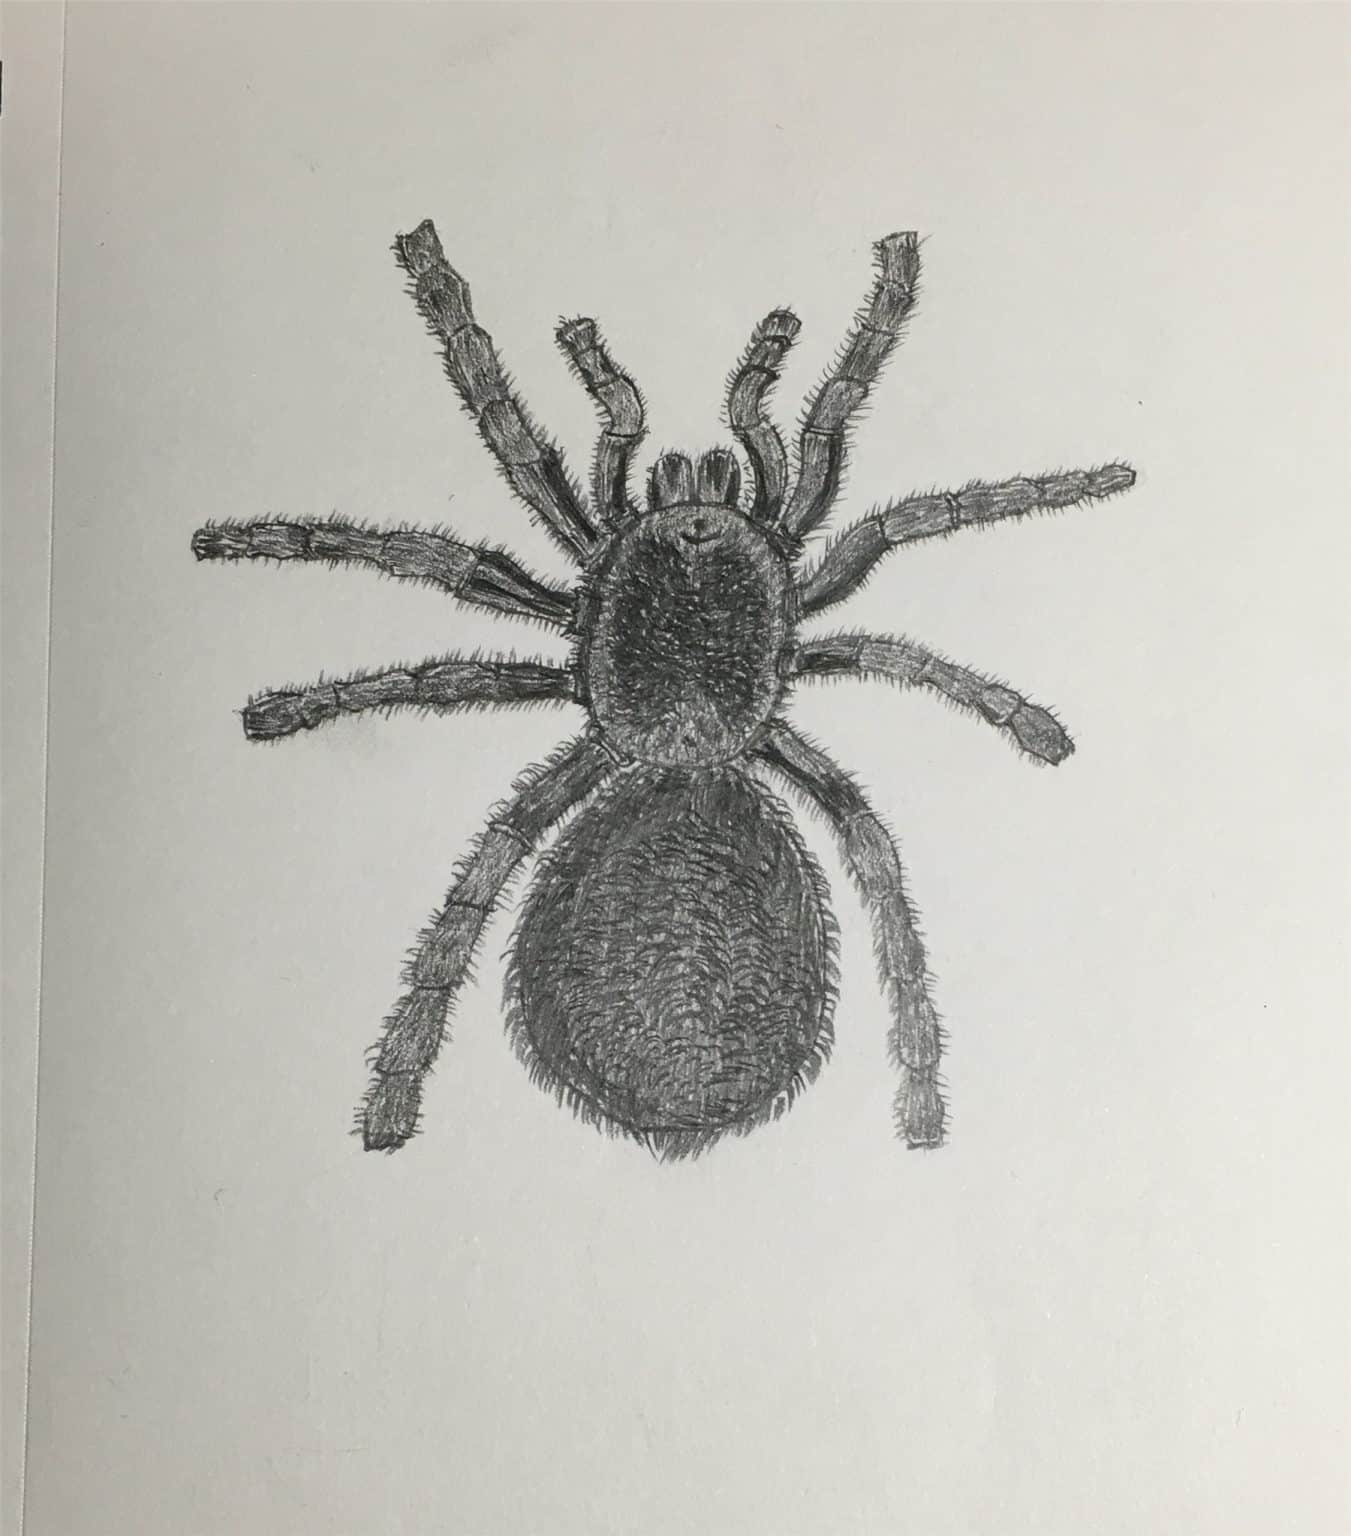 How To Draw A Spider For Halloween Step By Step